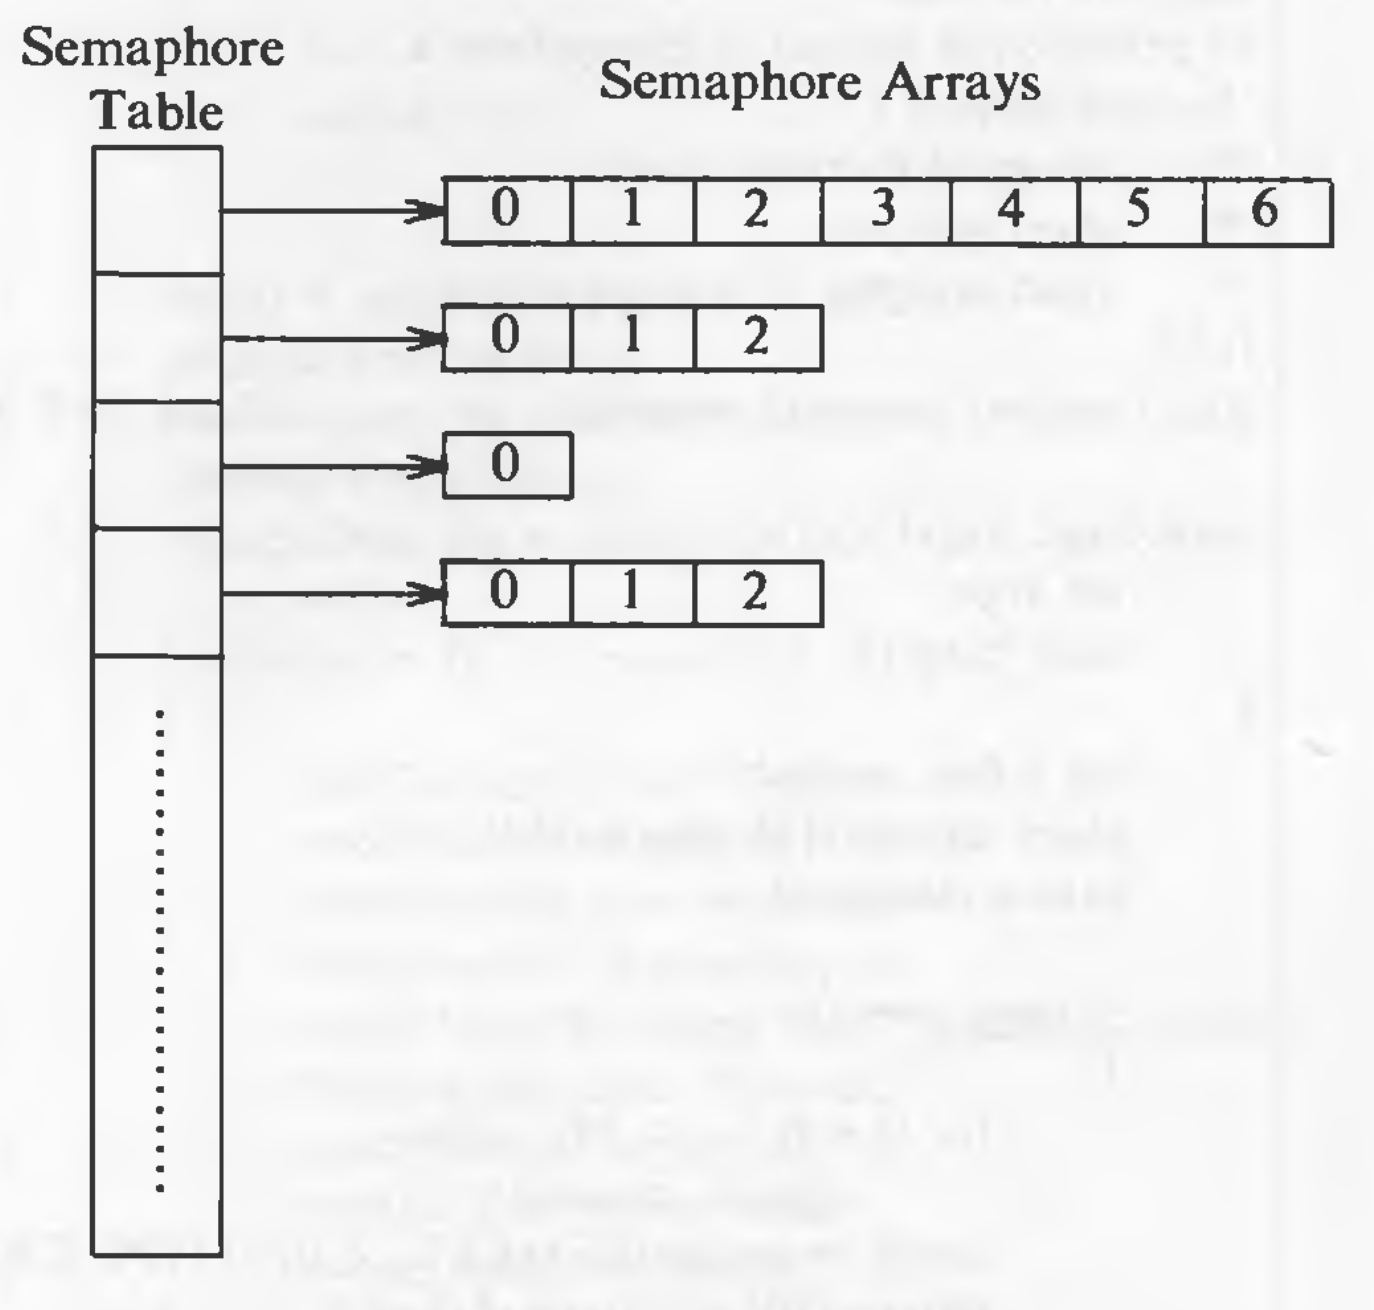 Data structure for semaphores